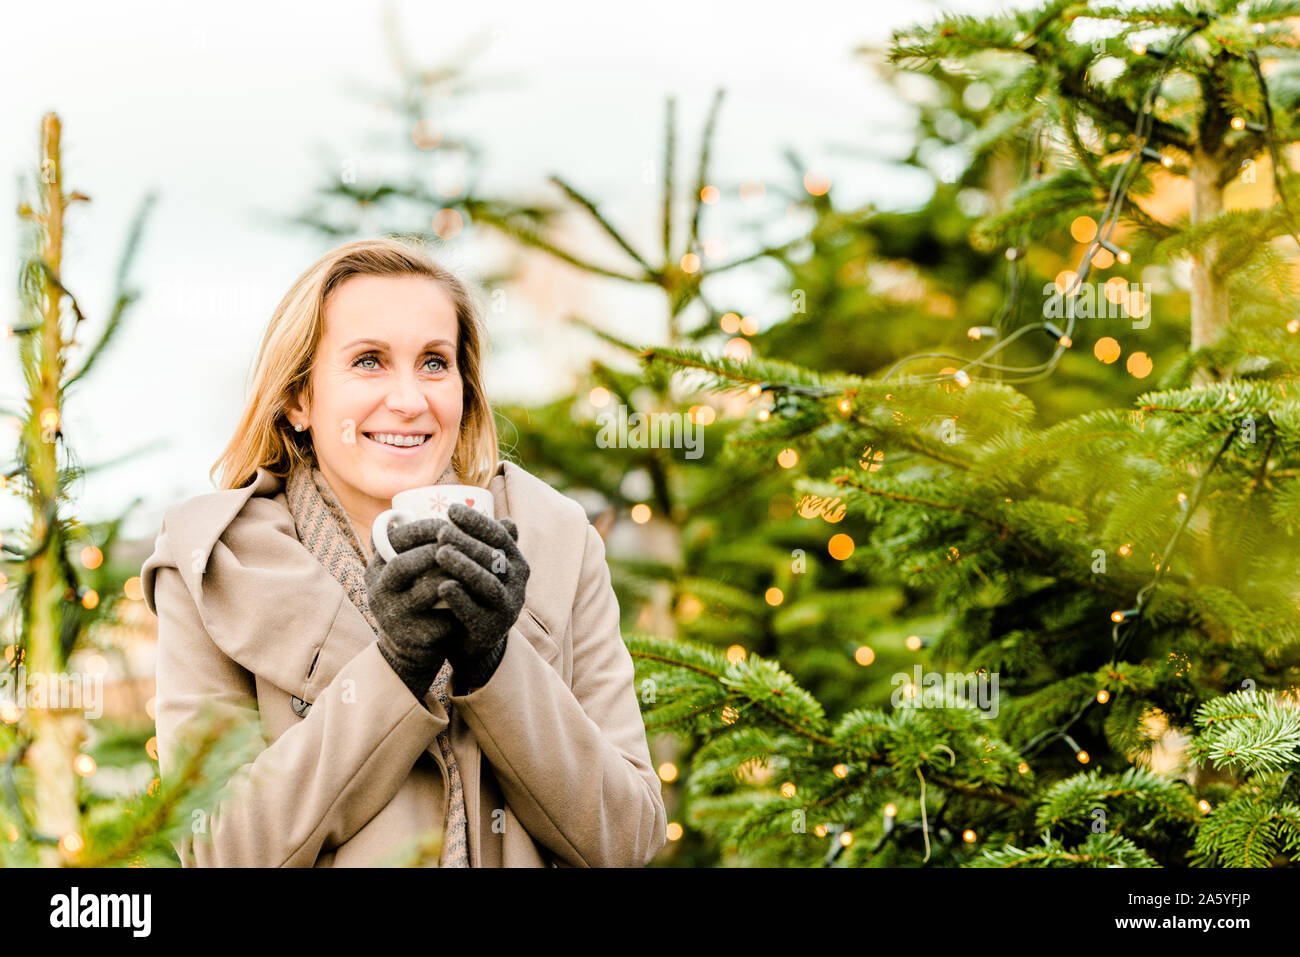 portrait of a happy woman holding a hot drink in her hand surrounded by christmas lights on trees Stock Photo